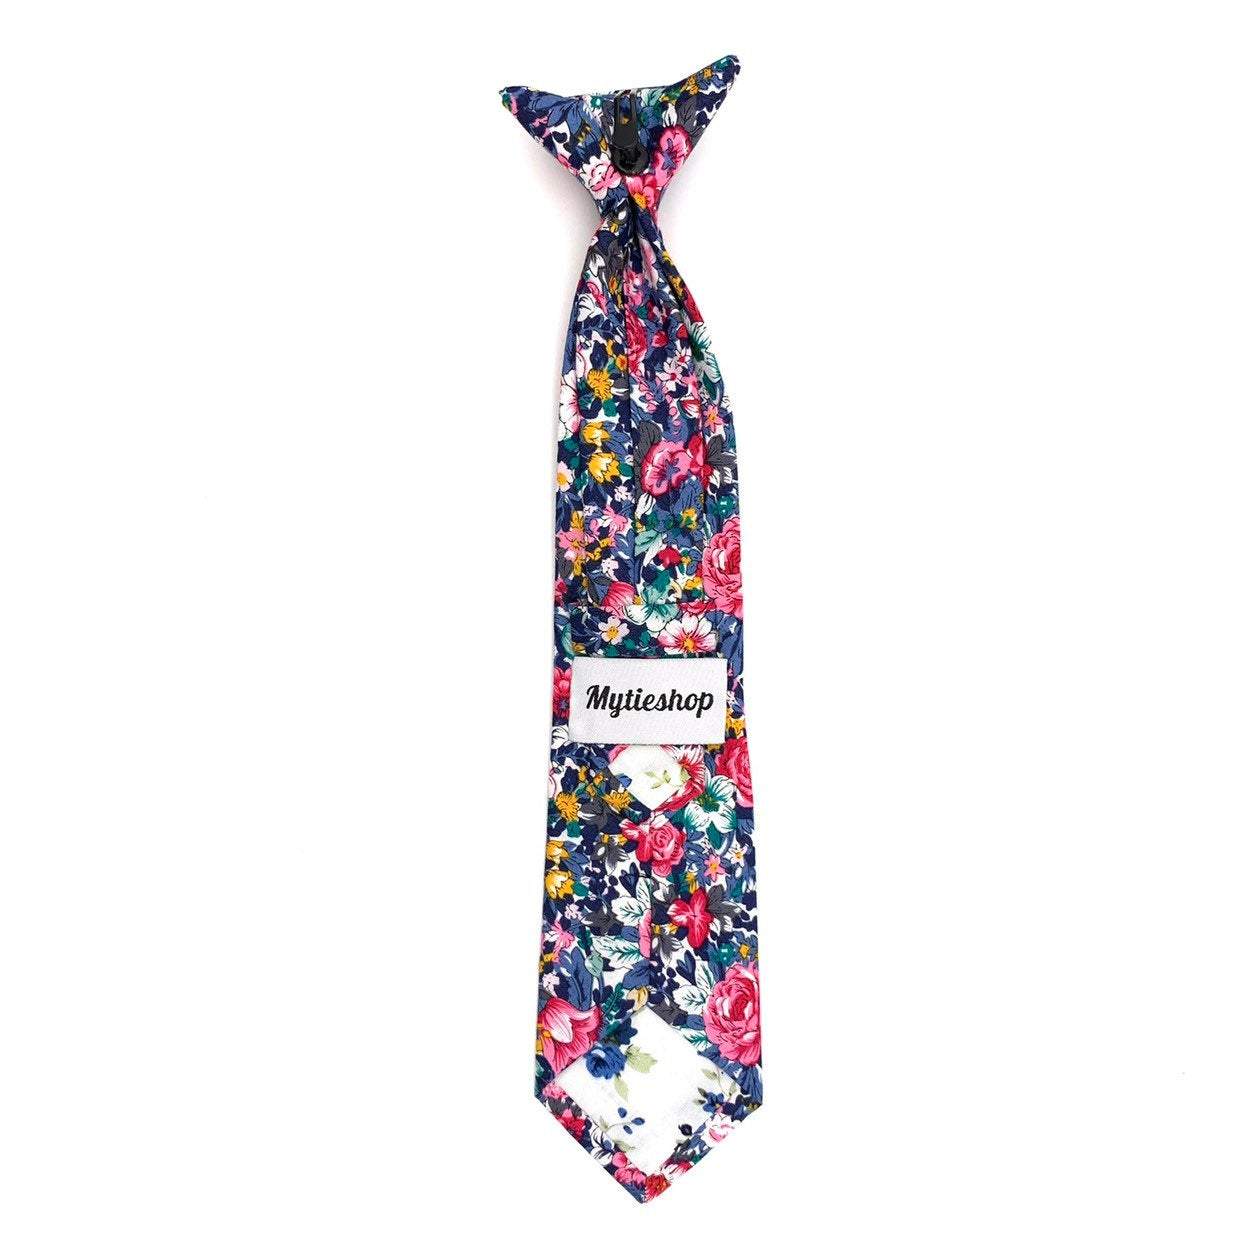 Pink Boys Floral Clip On Tie 2.3&quot; ROBERT MYTIESHOP-Material:Cotton Blend Approx Size: Max width: 6.5 cm / 2.4 inches 9-24 months 26 CM2-5 years 31 CM9-11 Years 43 CM Great for: Groom Groomsmen Wedding Shoots Formal Prom Fancy Parties Gifts and presents-Mytieshop